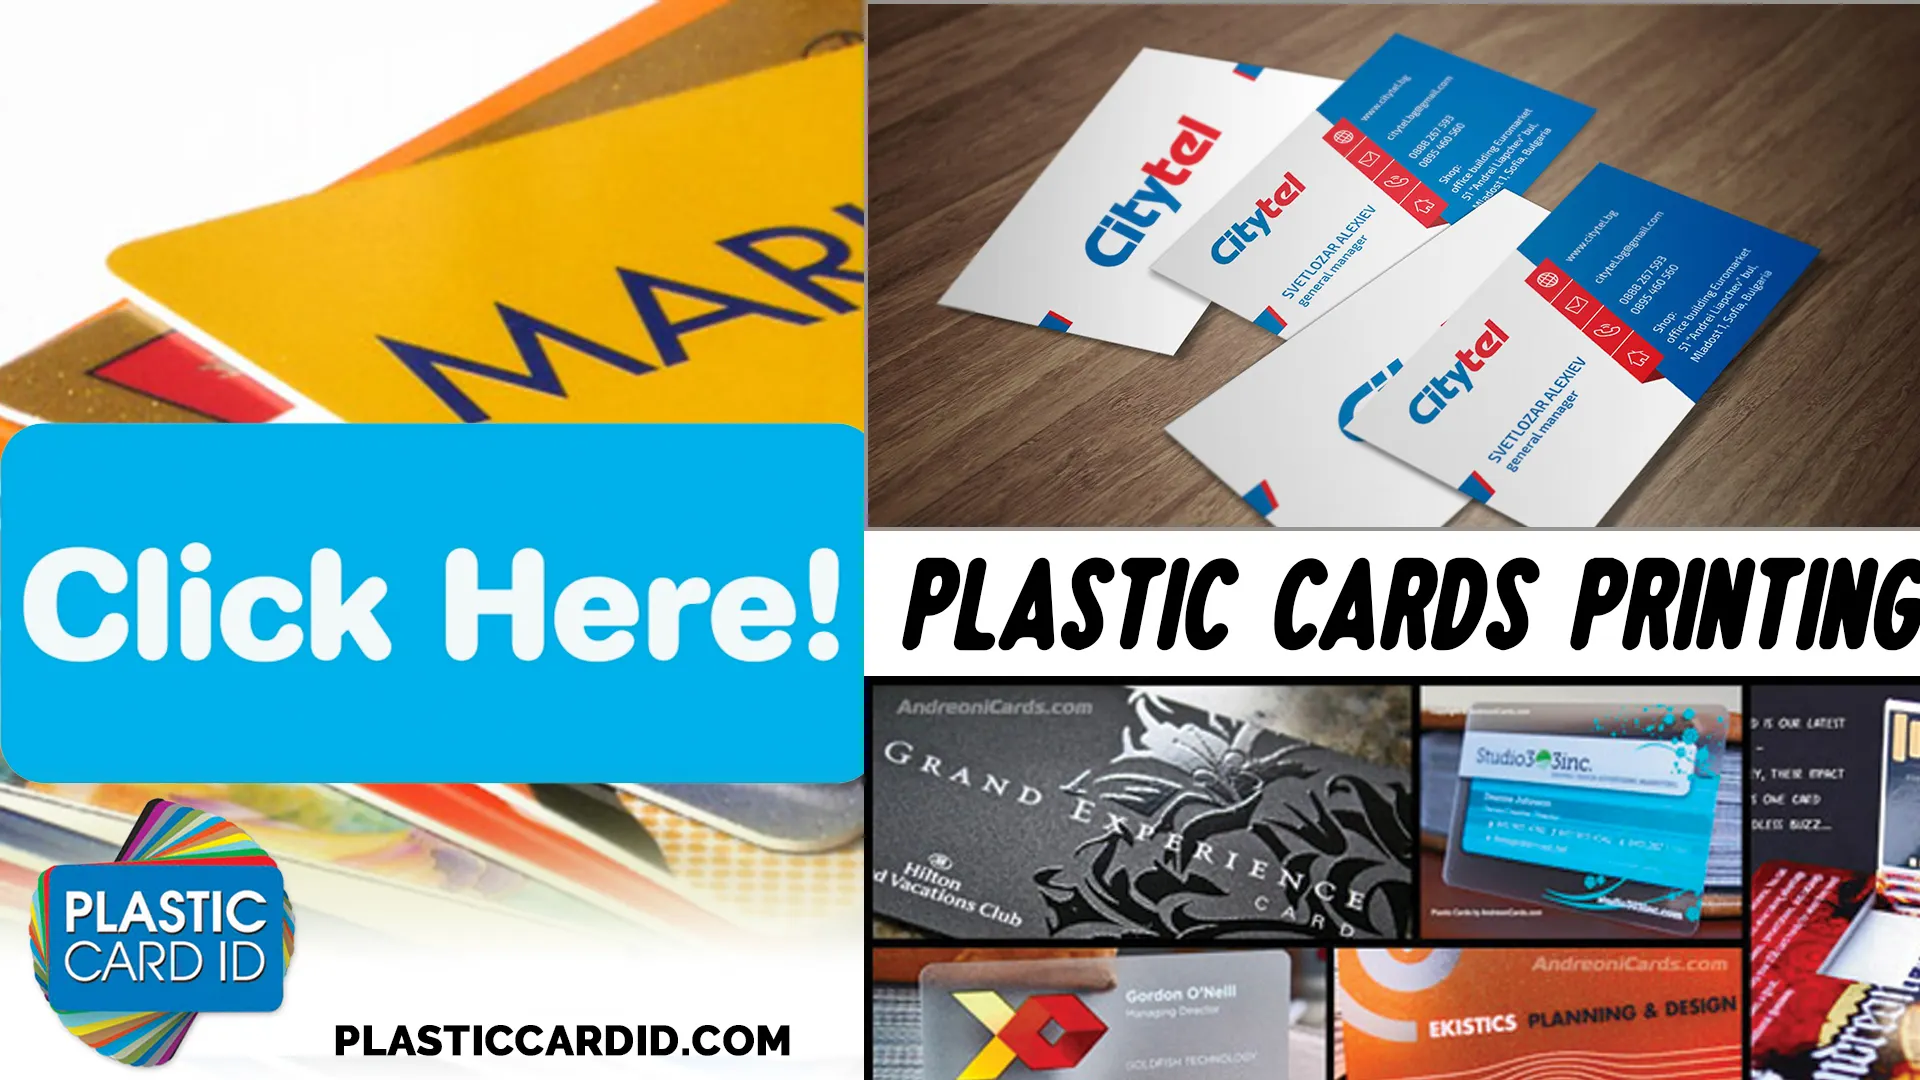 Plastic Cards that Rise Above the Rest